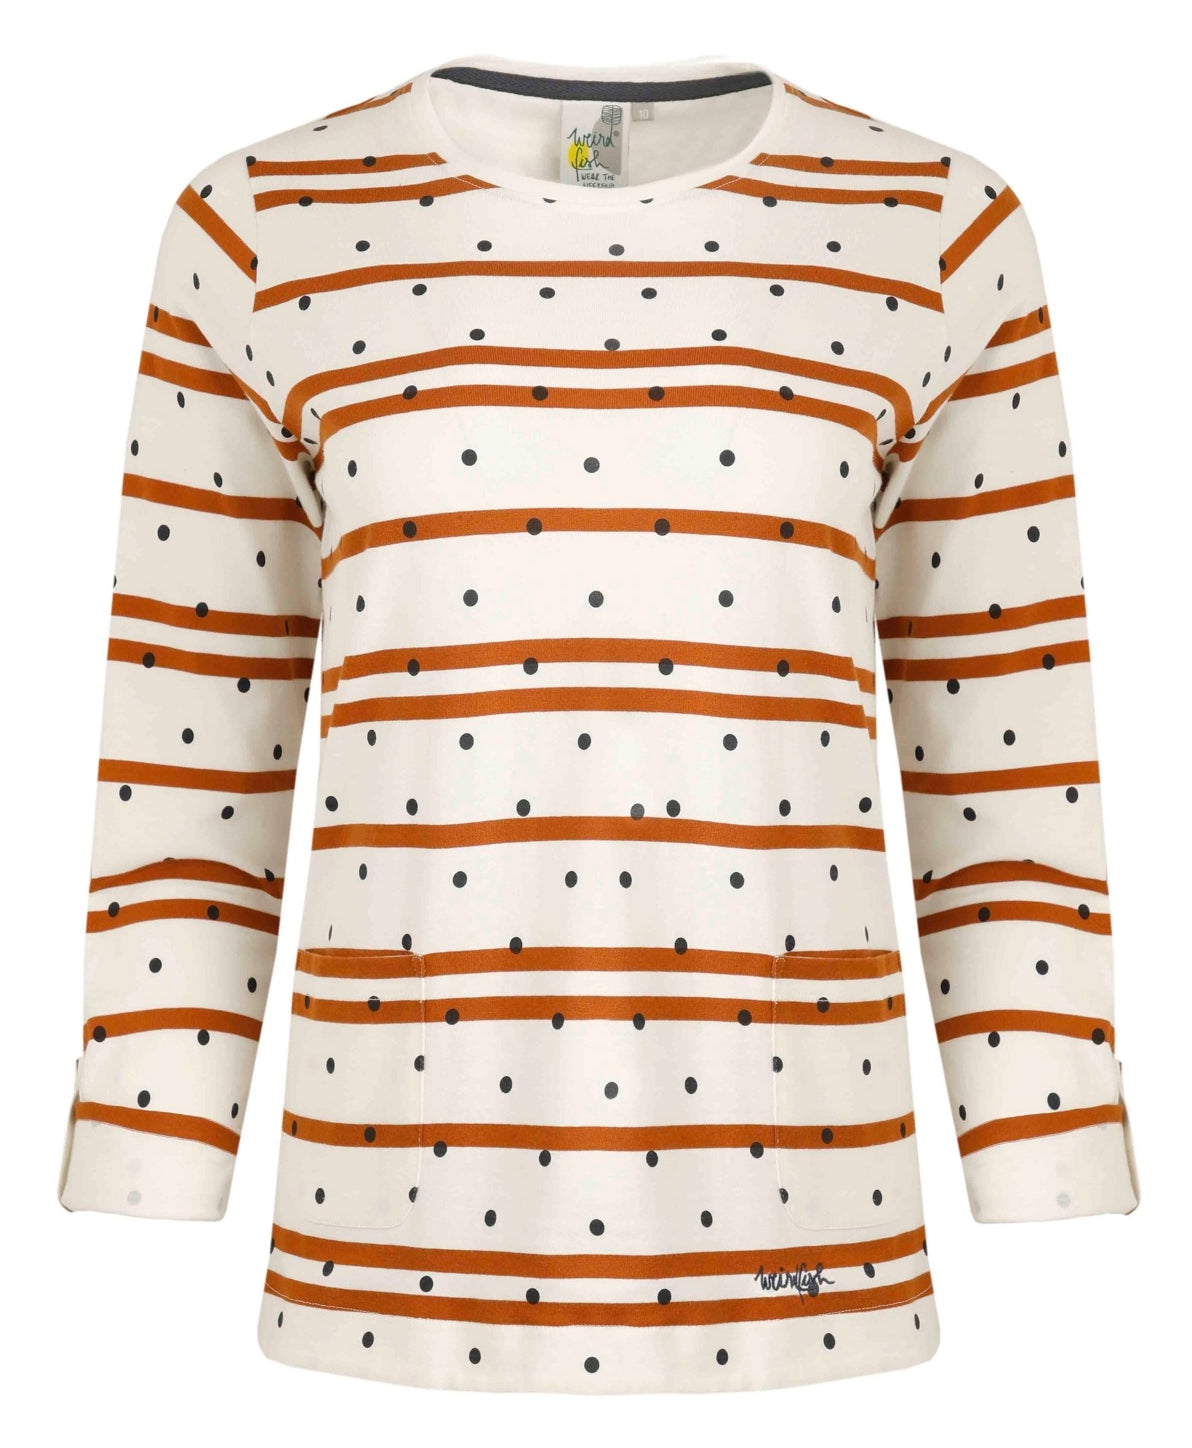 The women's Billie long sleeve tee from Weird Fish in light cream with a stripe and dot pattern.